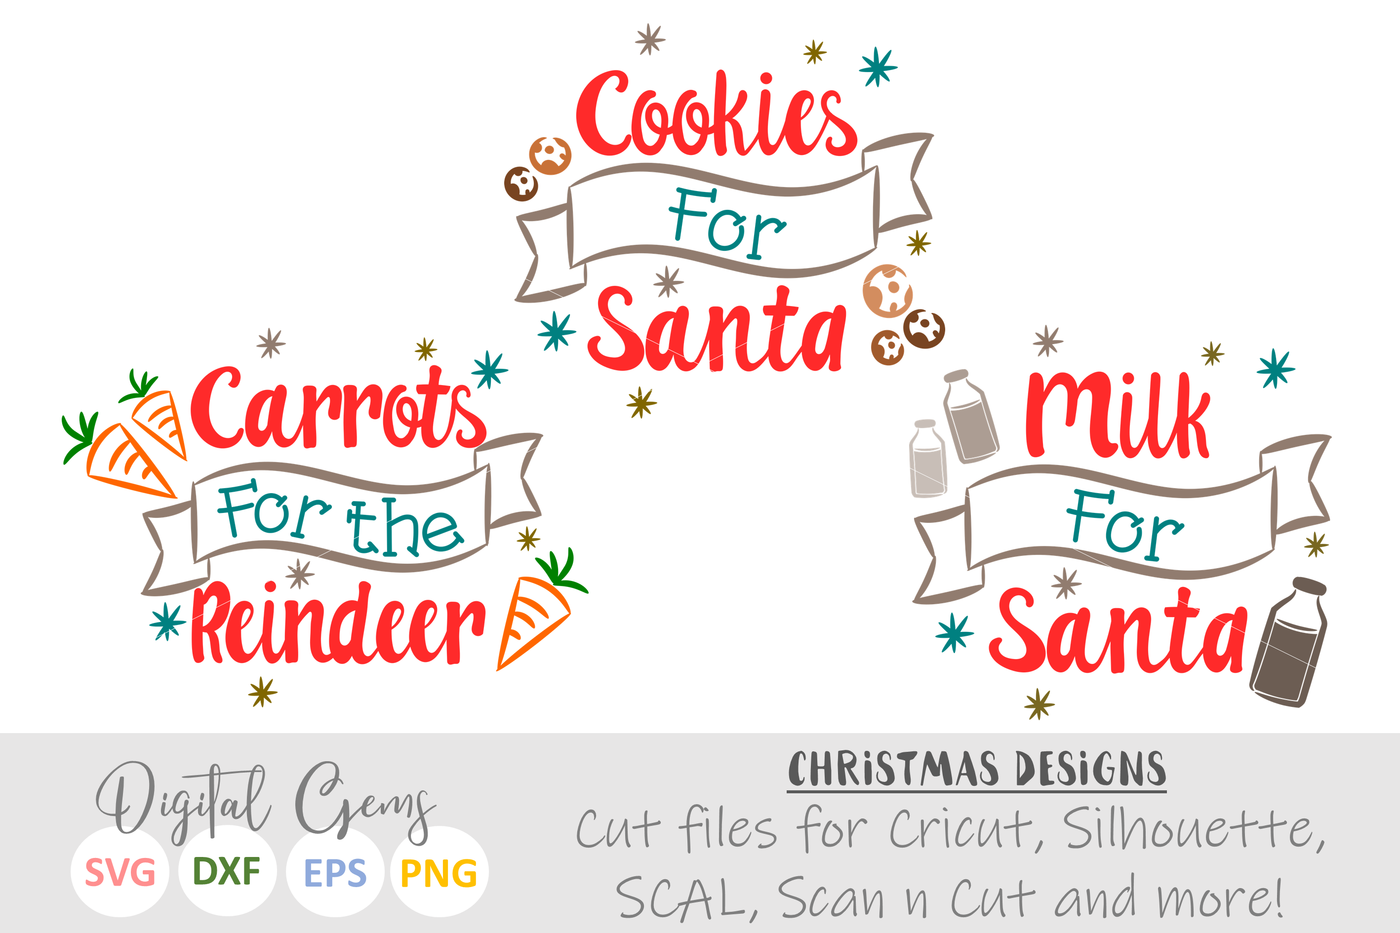 Milk And Cookies For Santa Carrots For The Reindeer Christmas Design By Digital Gems Thehungryjpeg Com